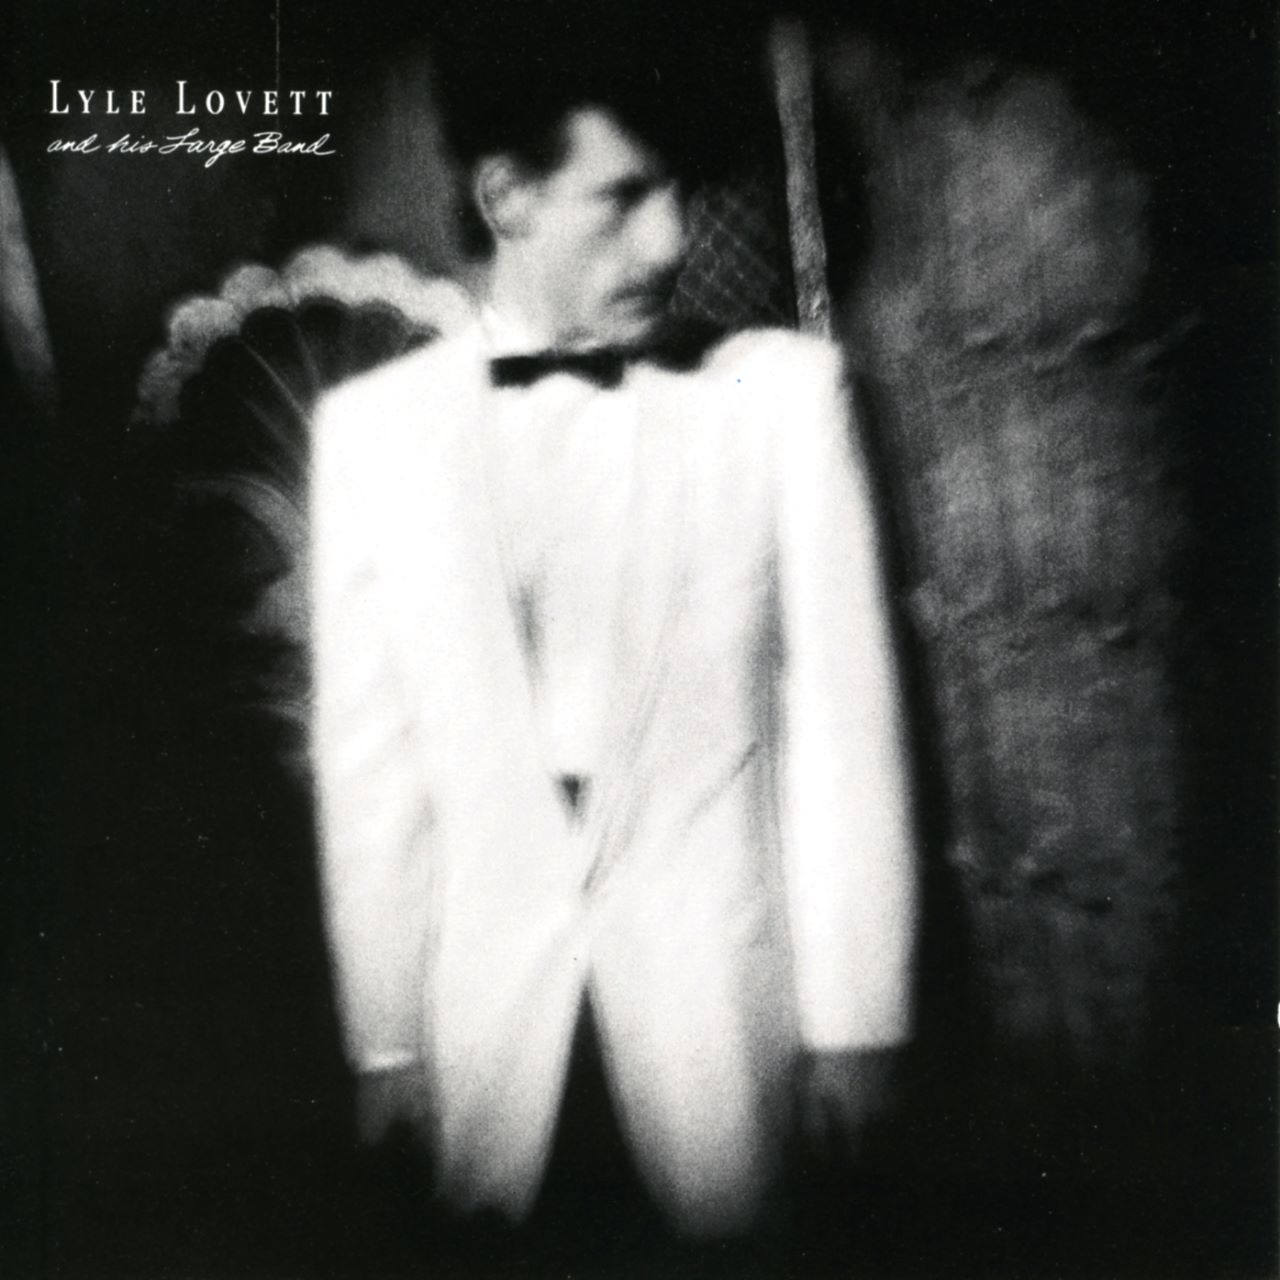 Lyle Lovett - Lyle Lovett And His Large Band cover album